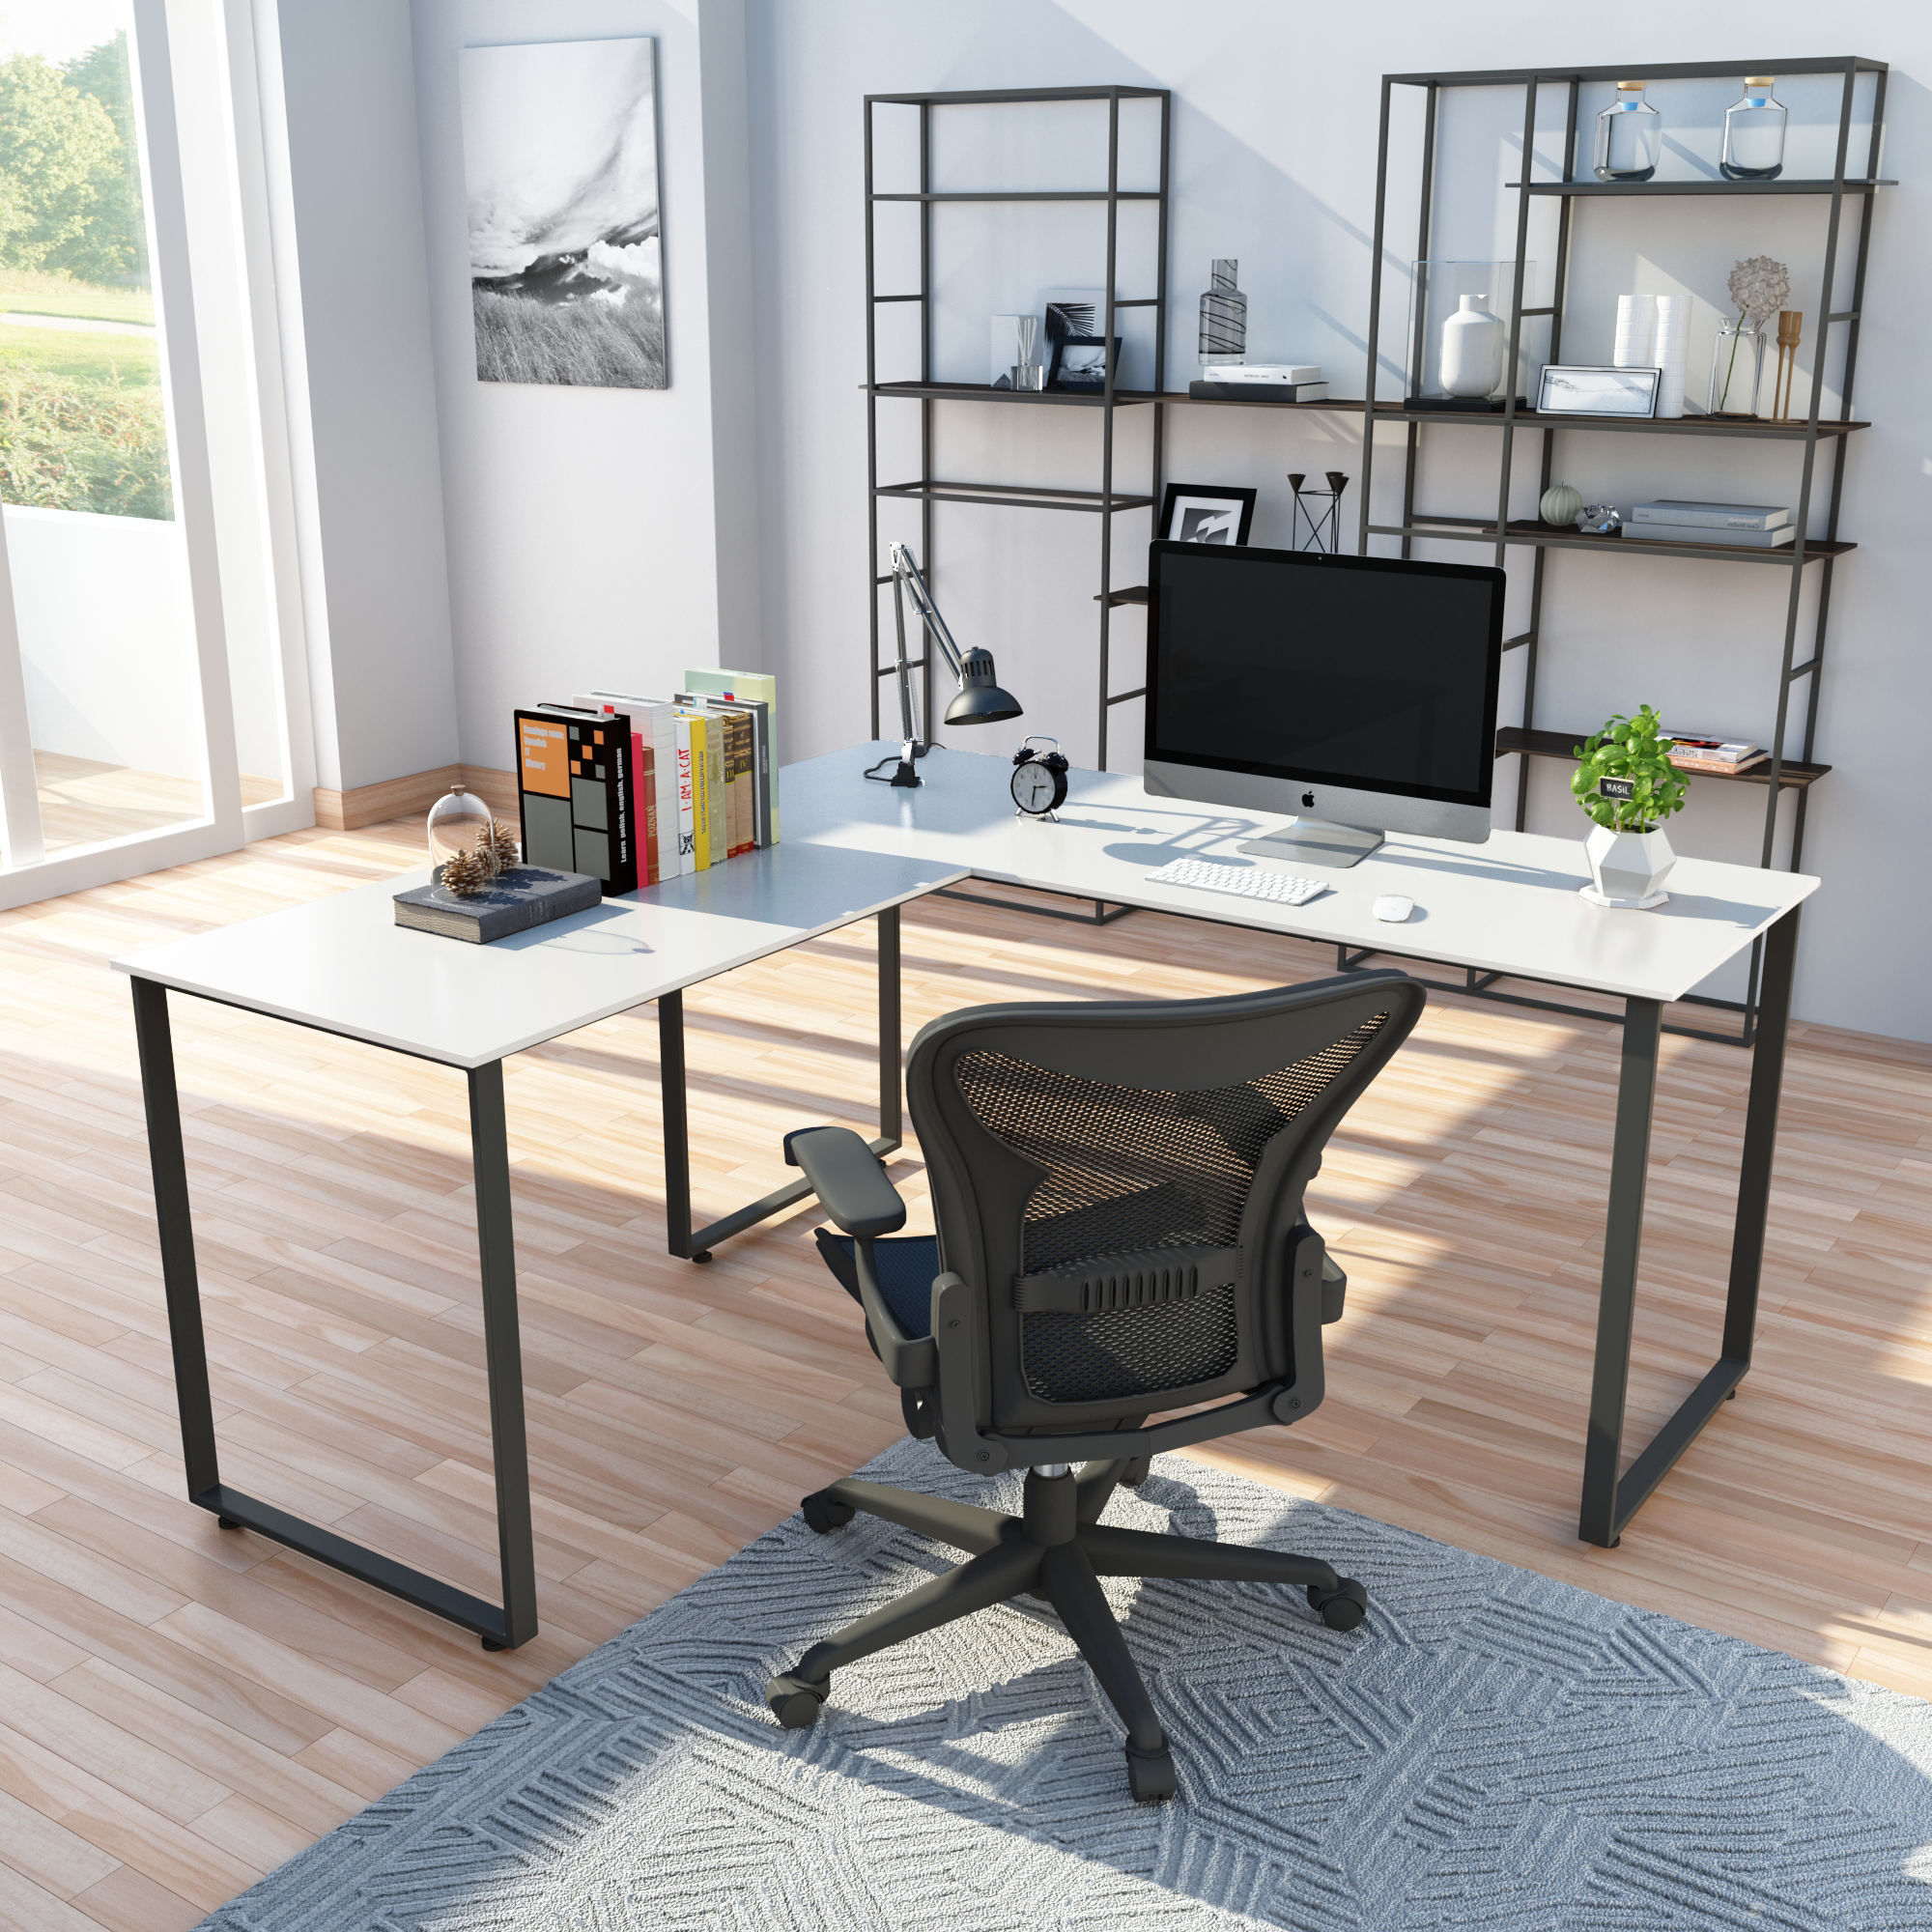 enyopro Home Office Computer Desk, 58’’ L-Shaped Corner Desk with 0.7" Thicker Tabletop, Space-Saving Workstation Table for Office Home Apartment, Sturdy Metal Frame Corner Gaming Study Table, B2257 - image 1 of 8